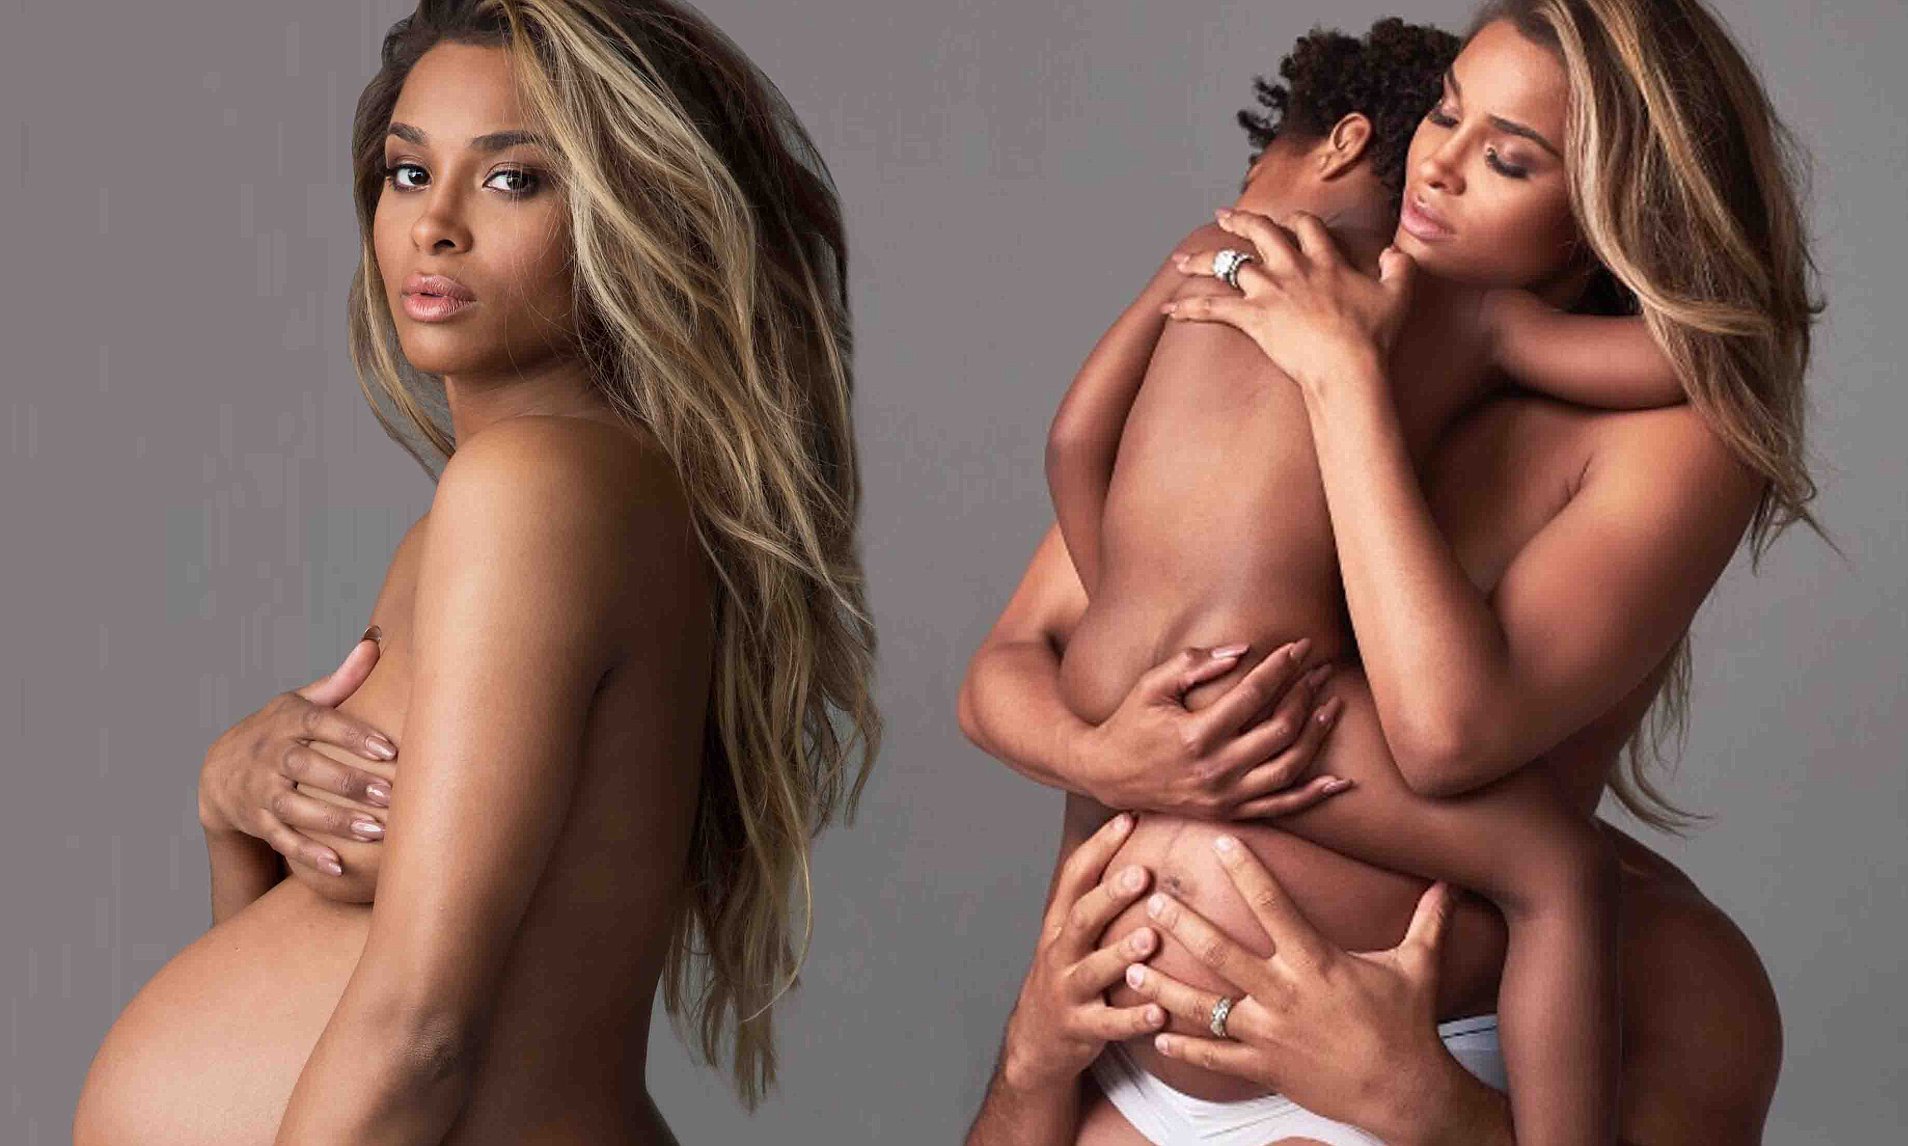 dev varshney recommends ciara renee topless pic